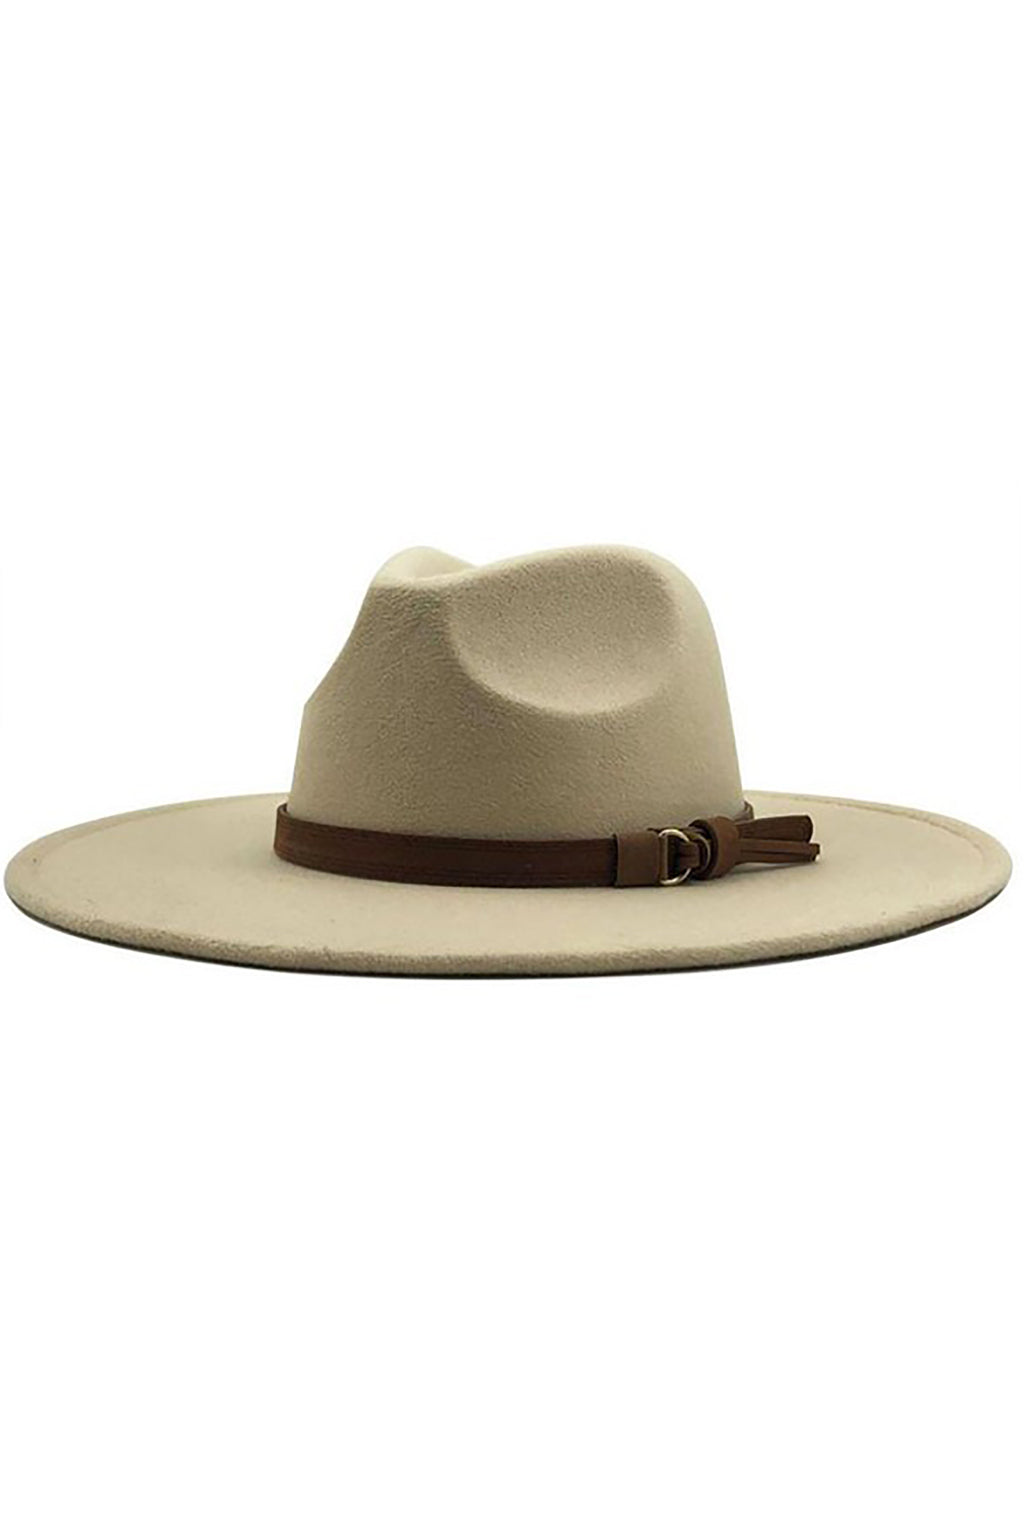 Beige Wide Brim Panama Hat - Shop Cute Accessories Now At Kendry Collection Boutique